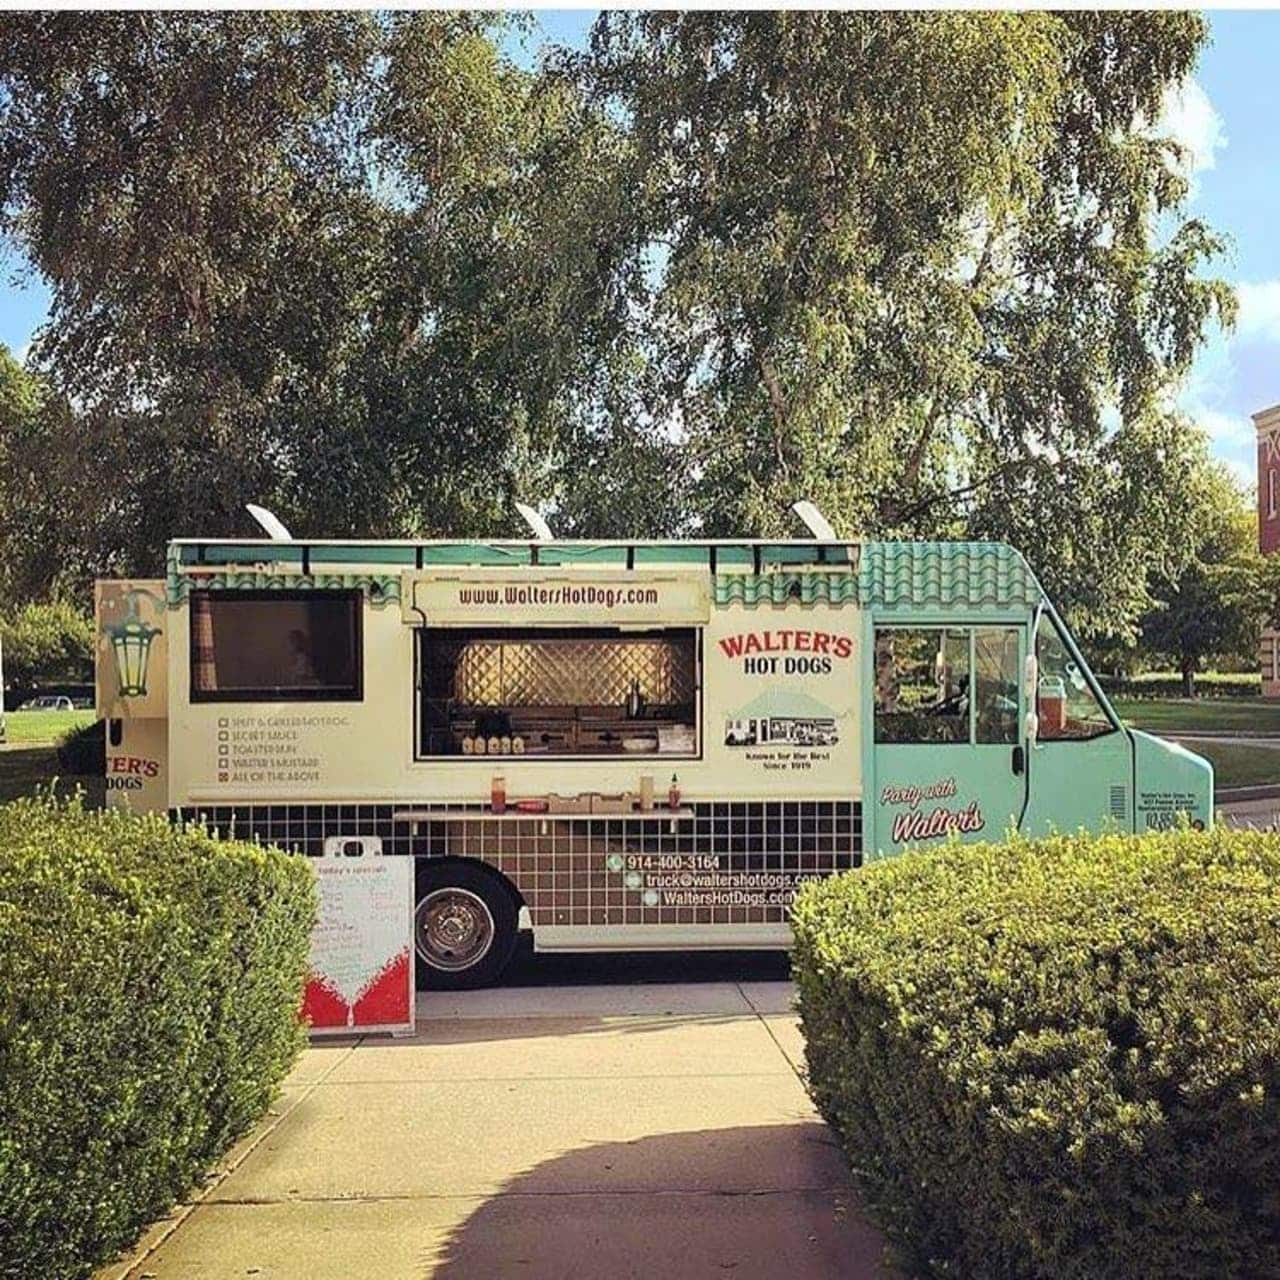 Walter's food truck will be on hand at the Mamaroneck Food Truck & Makers Market.